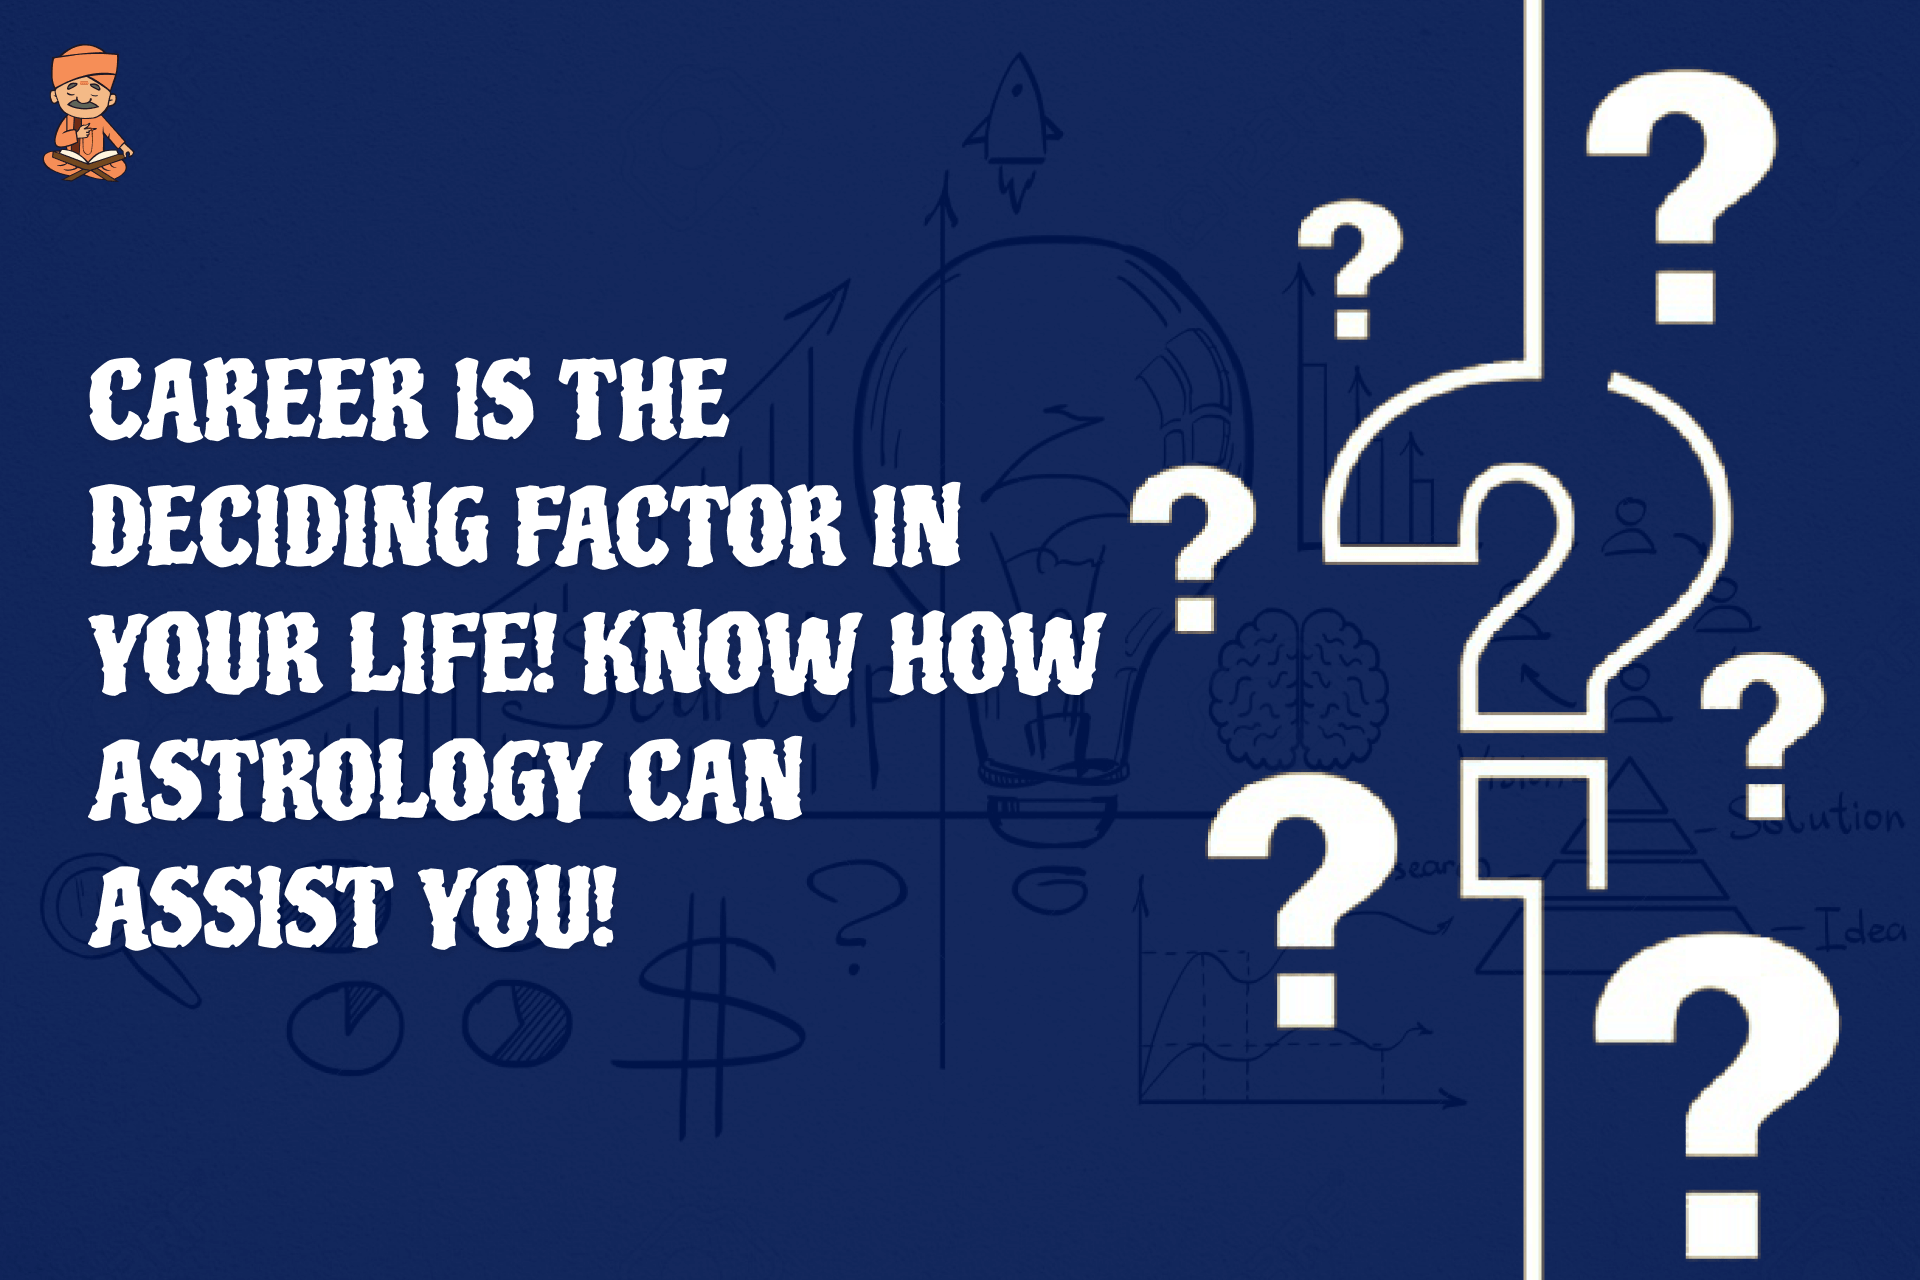 Career is the deciding factor in your life! Know how astrology can assist you!